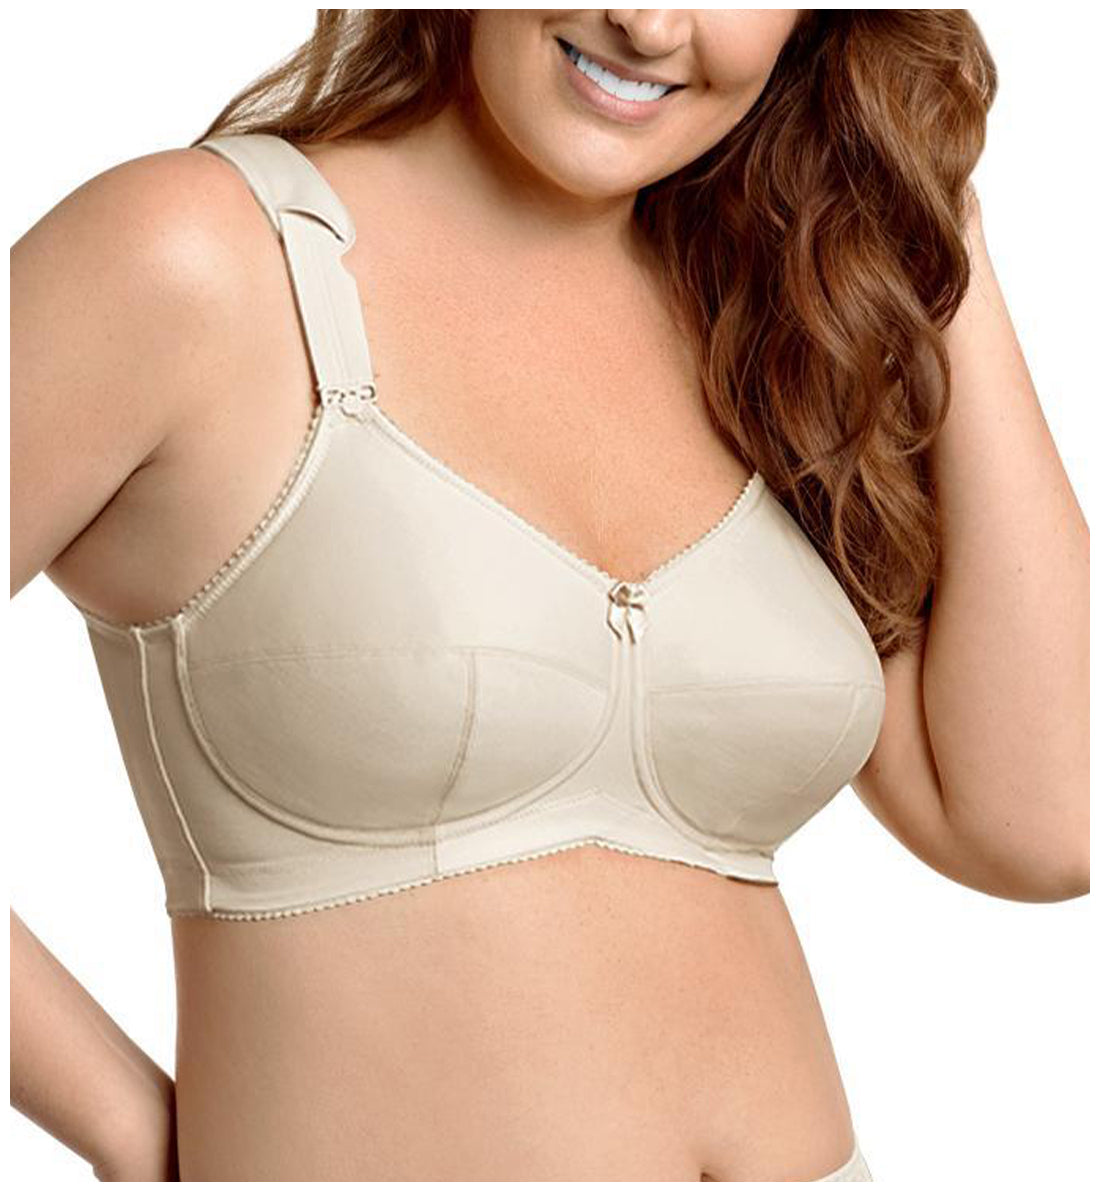 Elila Kaylee 3-Part Cup Full Support Softcup (1505),36F,Nude - Nude,36F